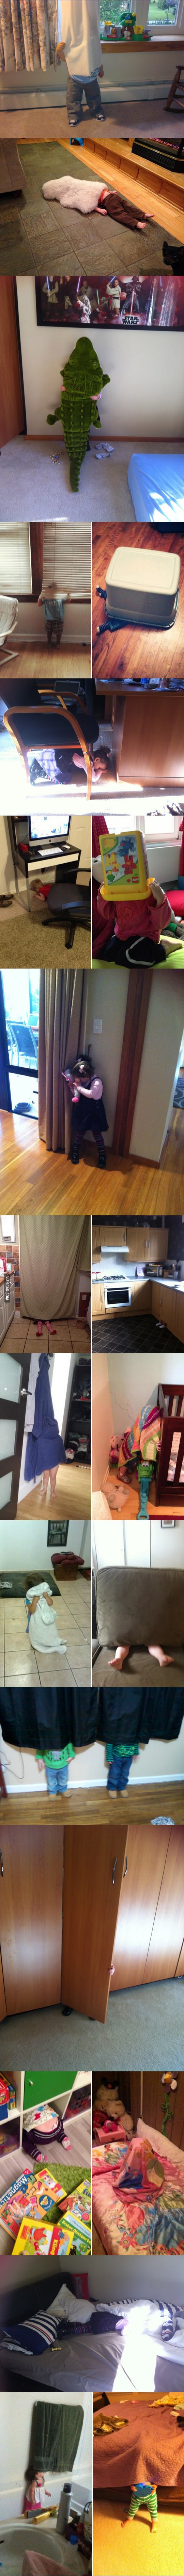 kids who really suck at hide and seek, lol, fail